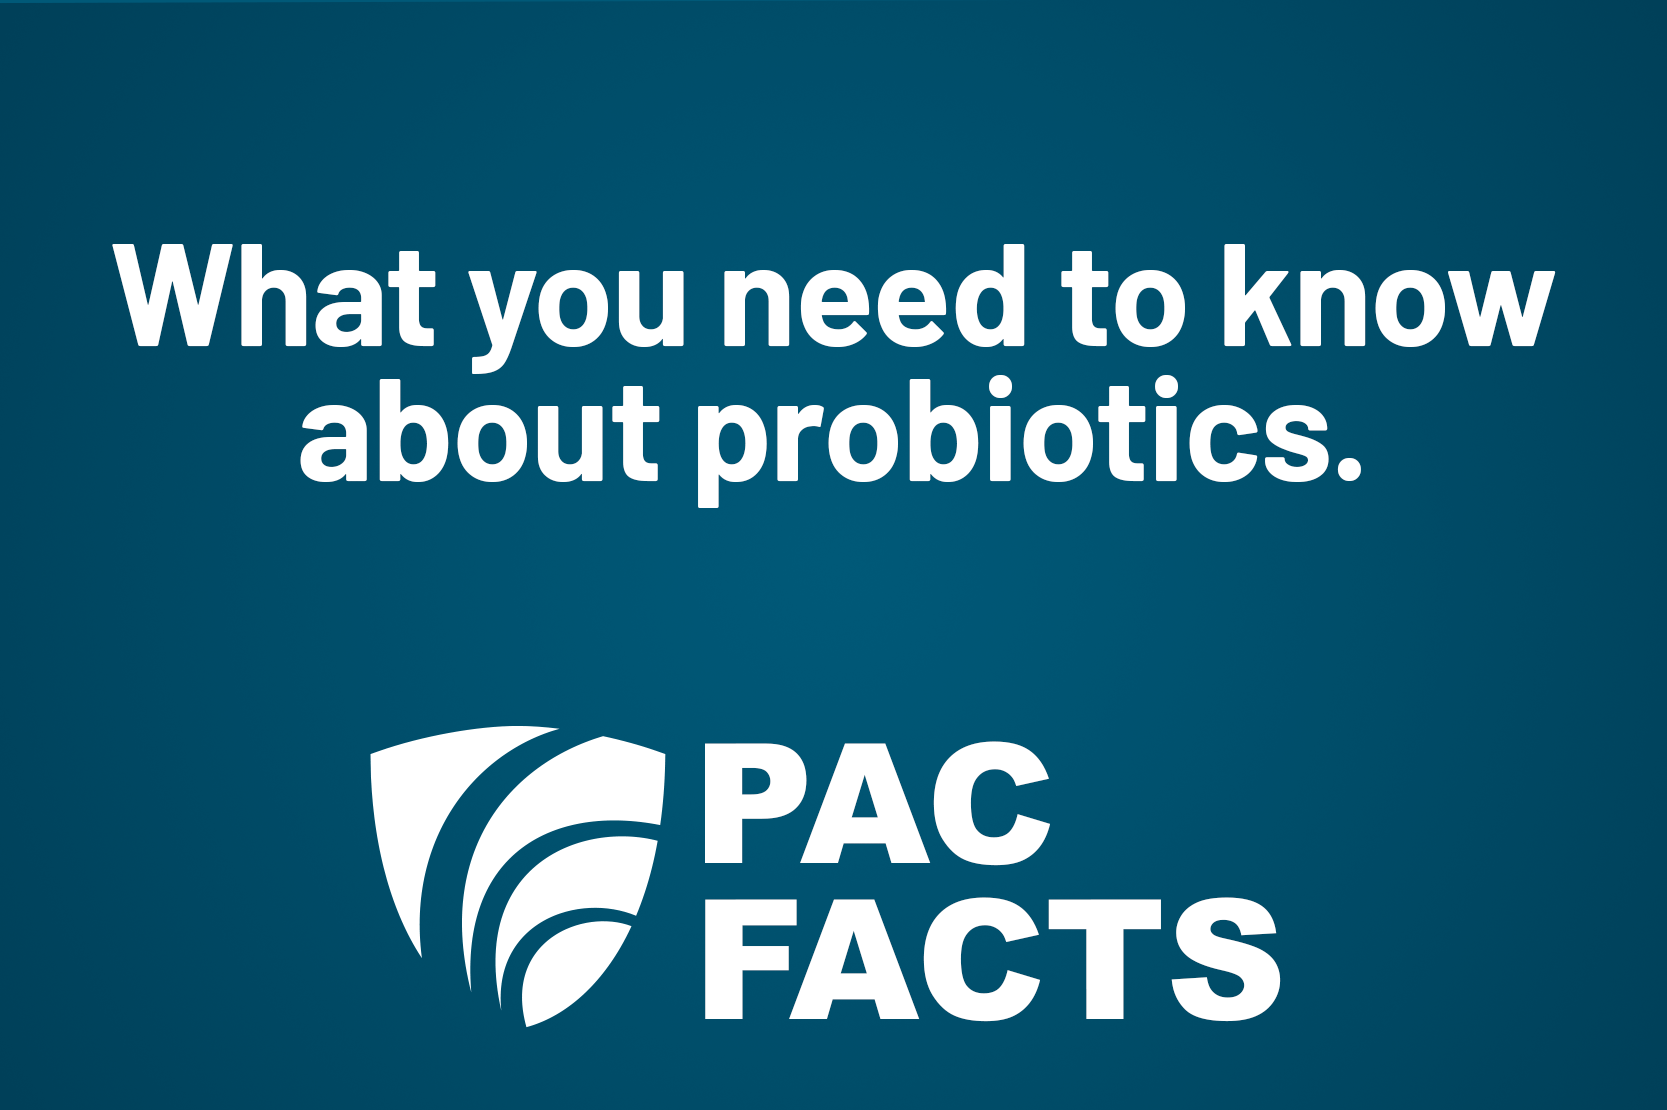 PAC Facts - What you need to know about probiotics